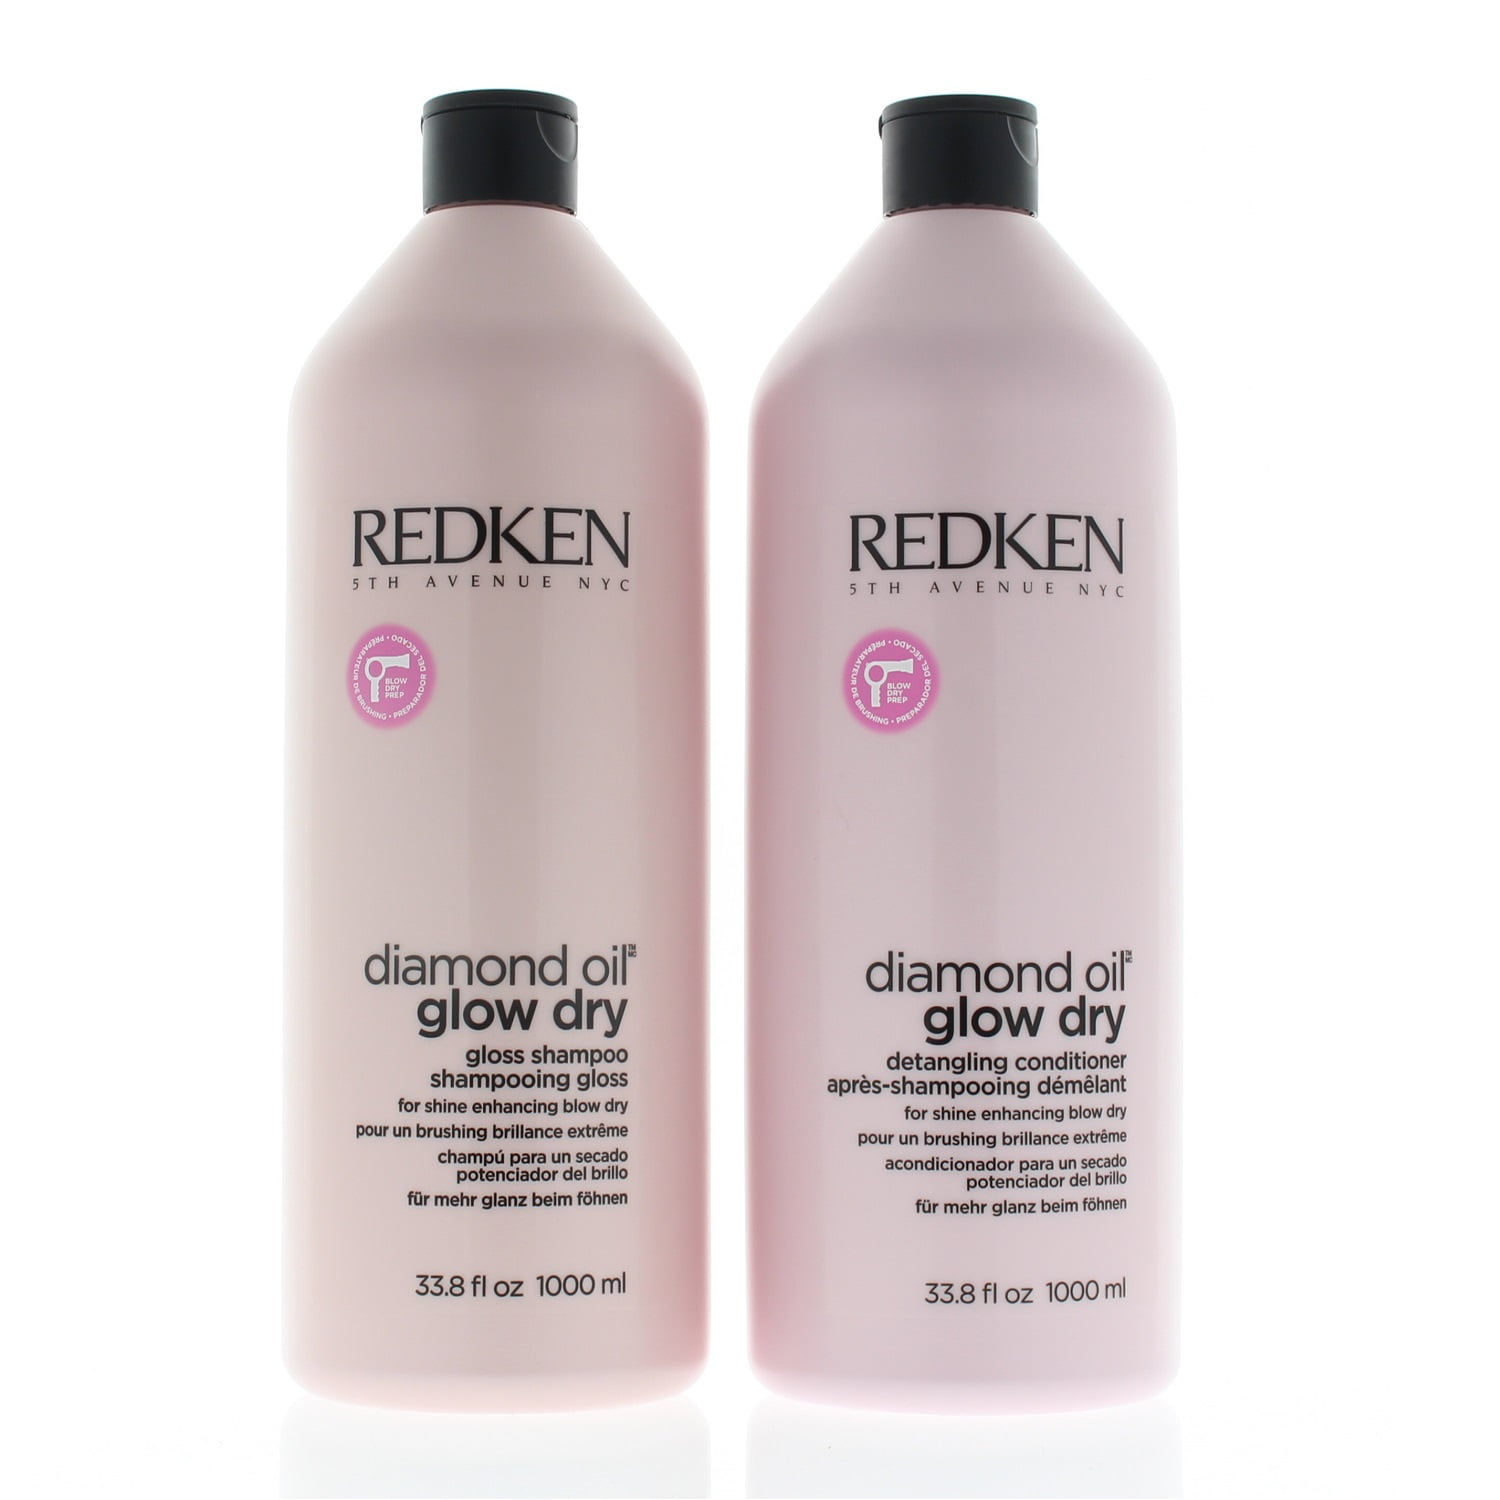 T At interagere forretning Redken Diamond Oil Glow Dry Shampoo And Conditioner 33.8 oz/1000 ml Set -  Walmart.com